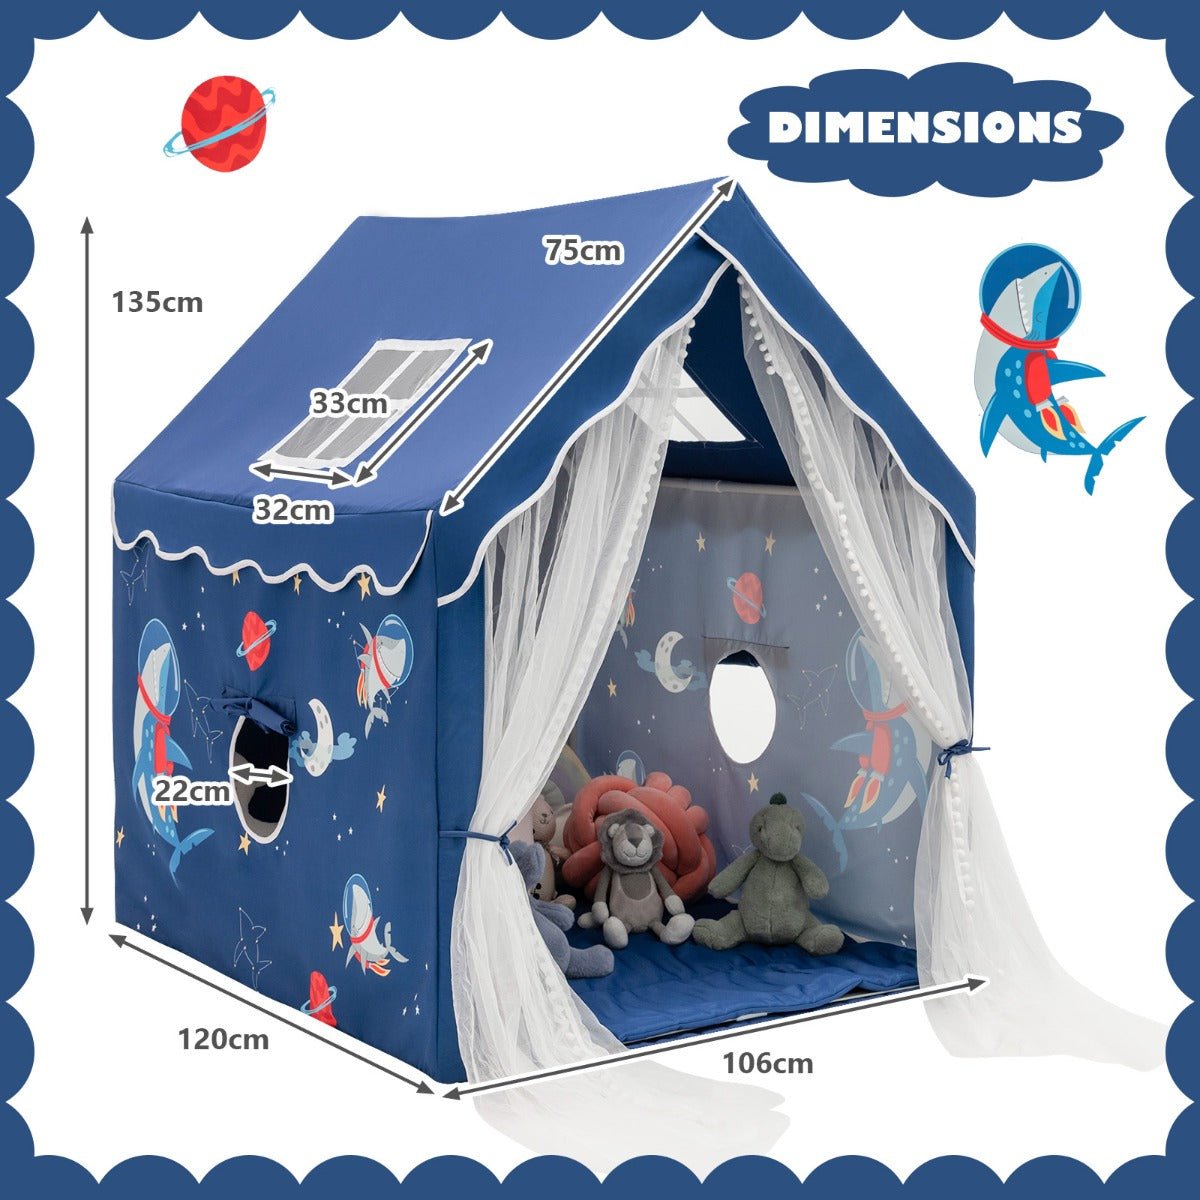 Explorative Kids Play Tent: Comfortable Space for Learning and Play